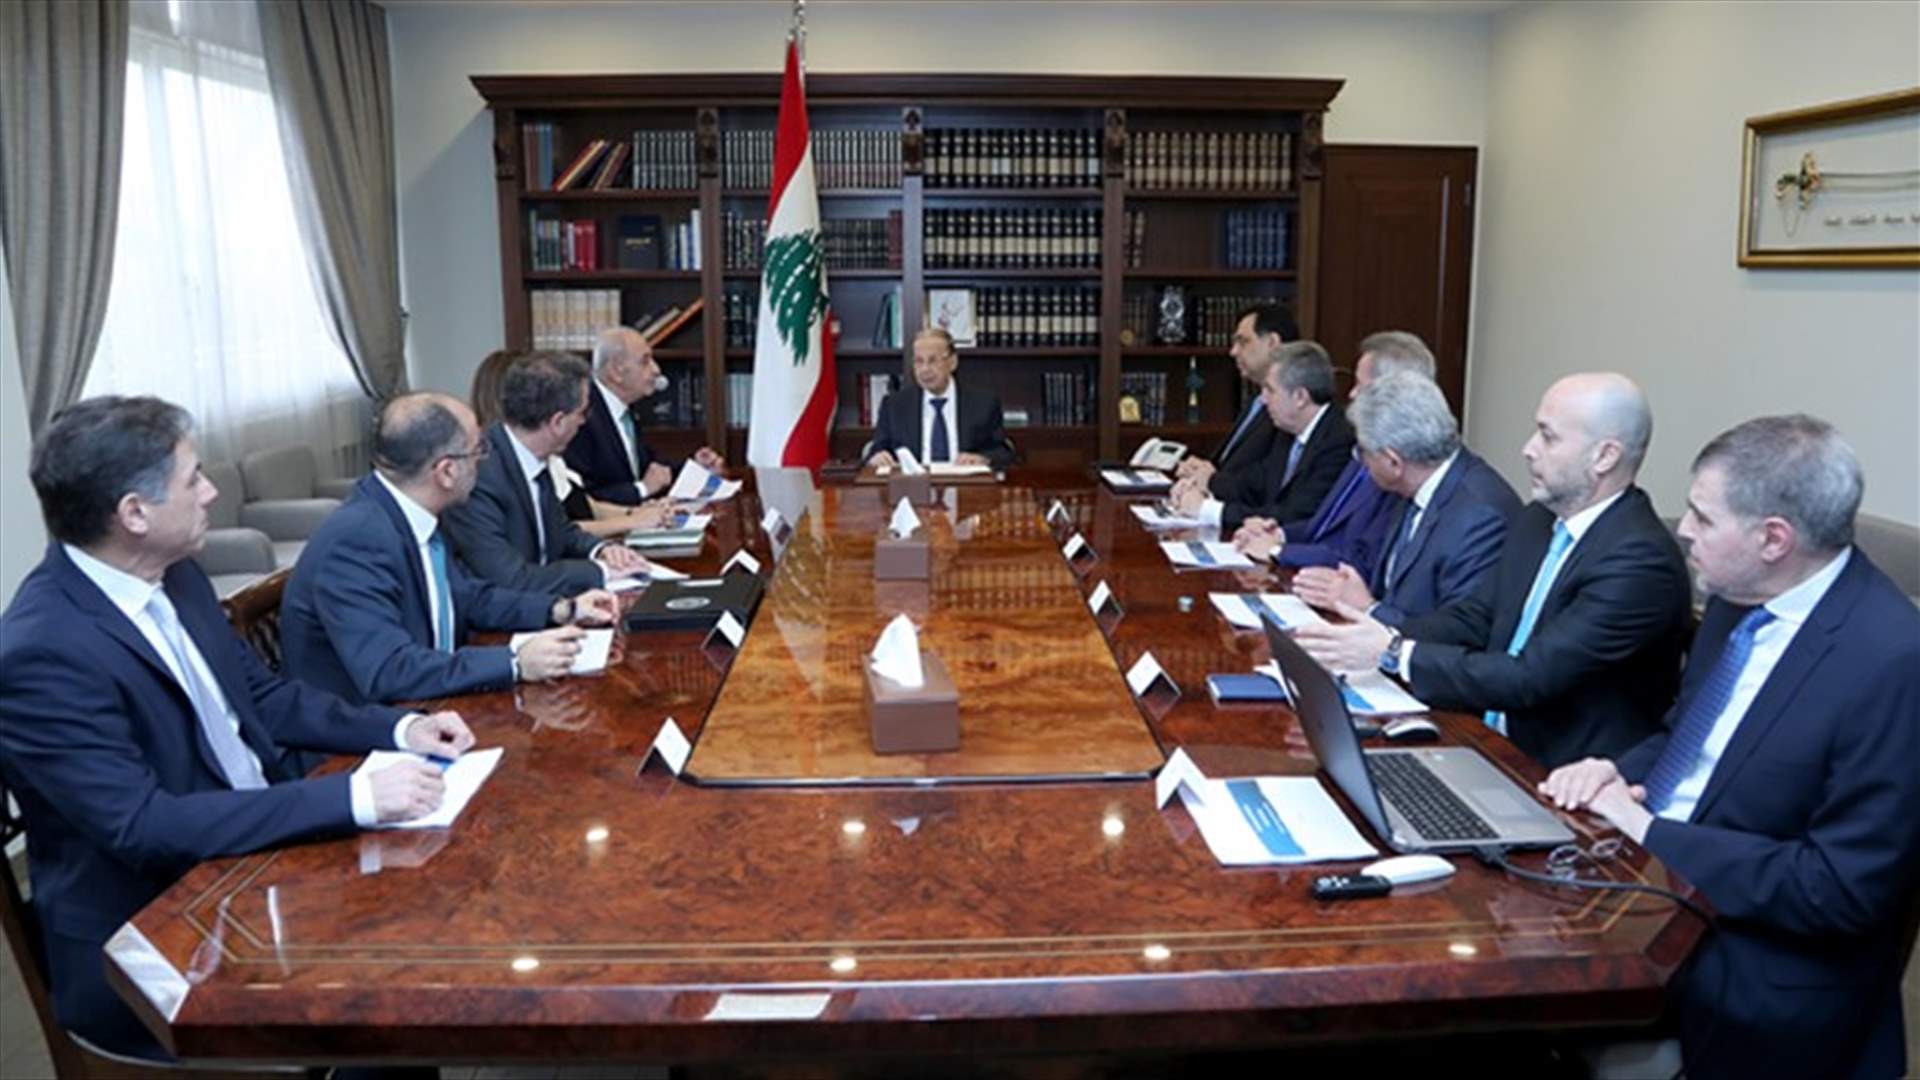 Choucair after Financial meeting in Baabda: Lebanon decided not to pay debt